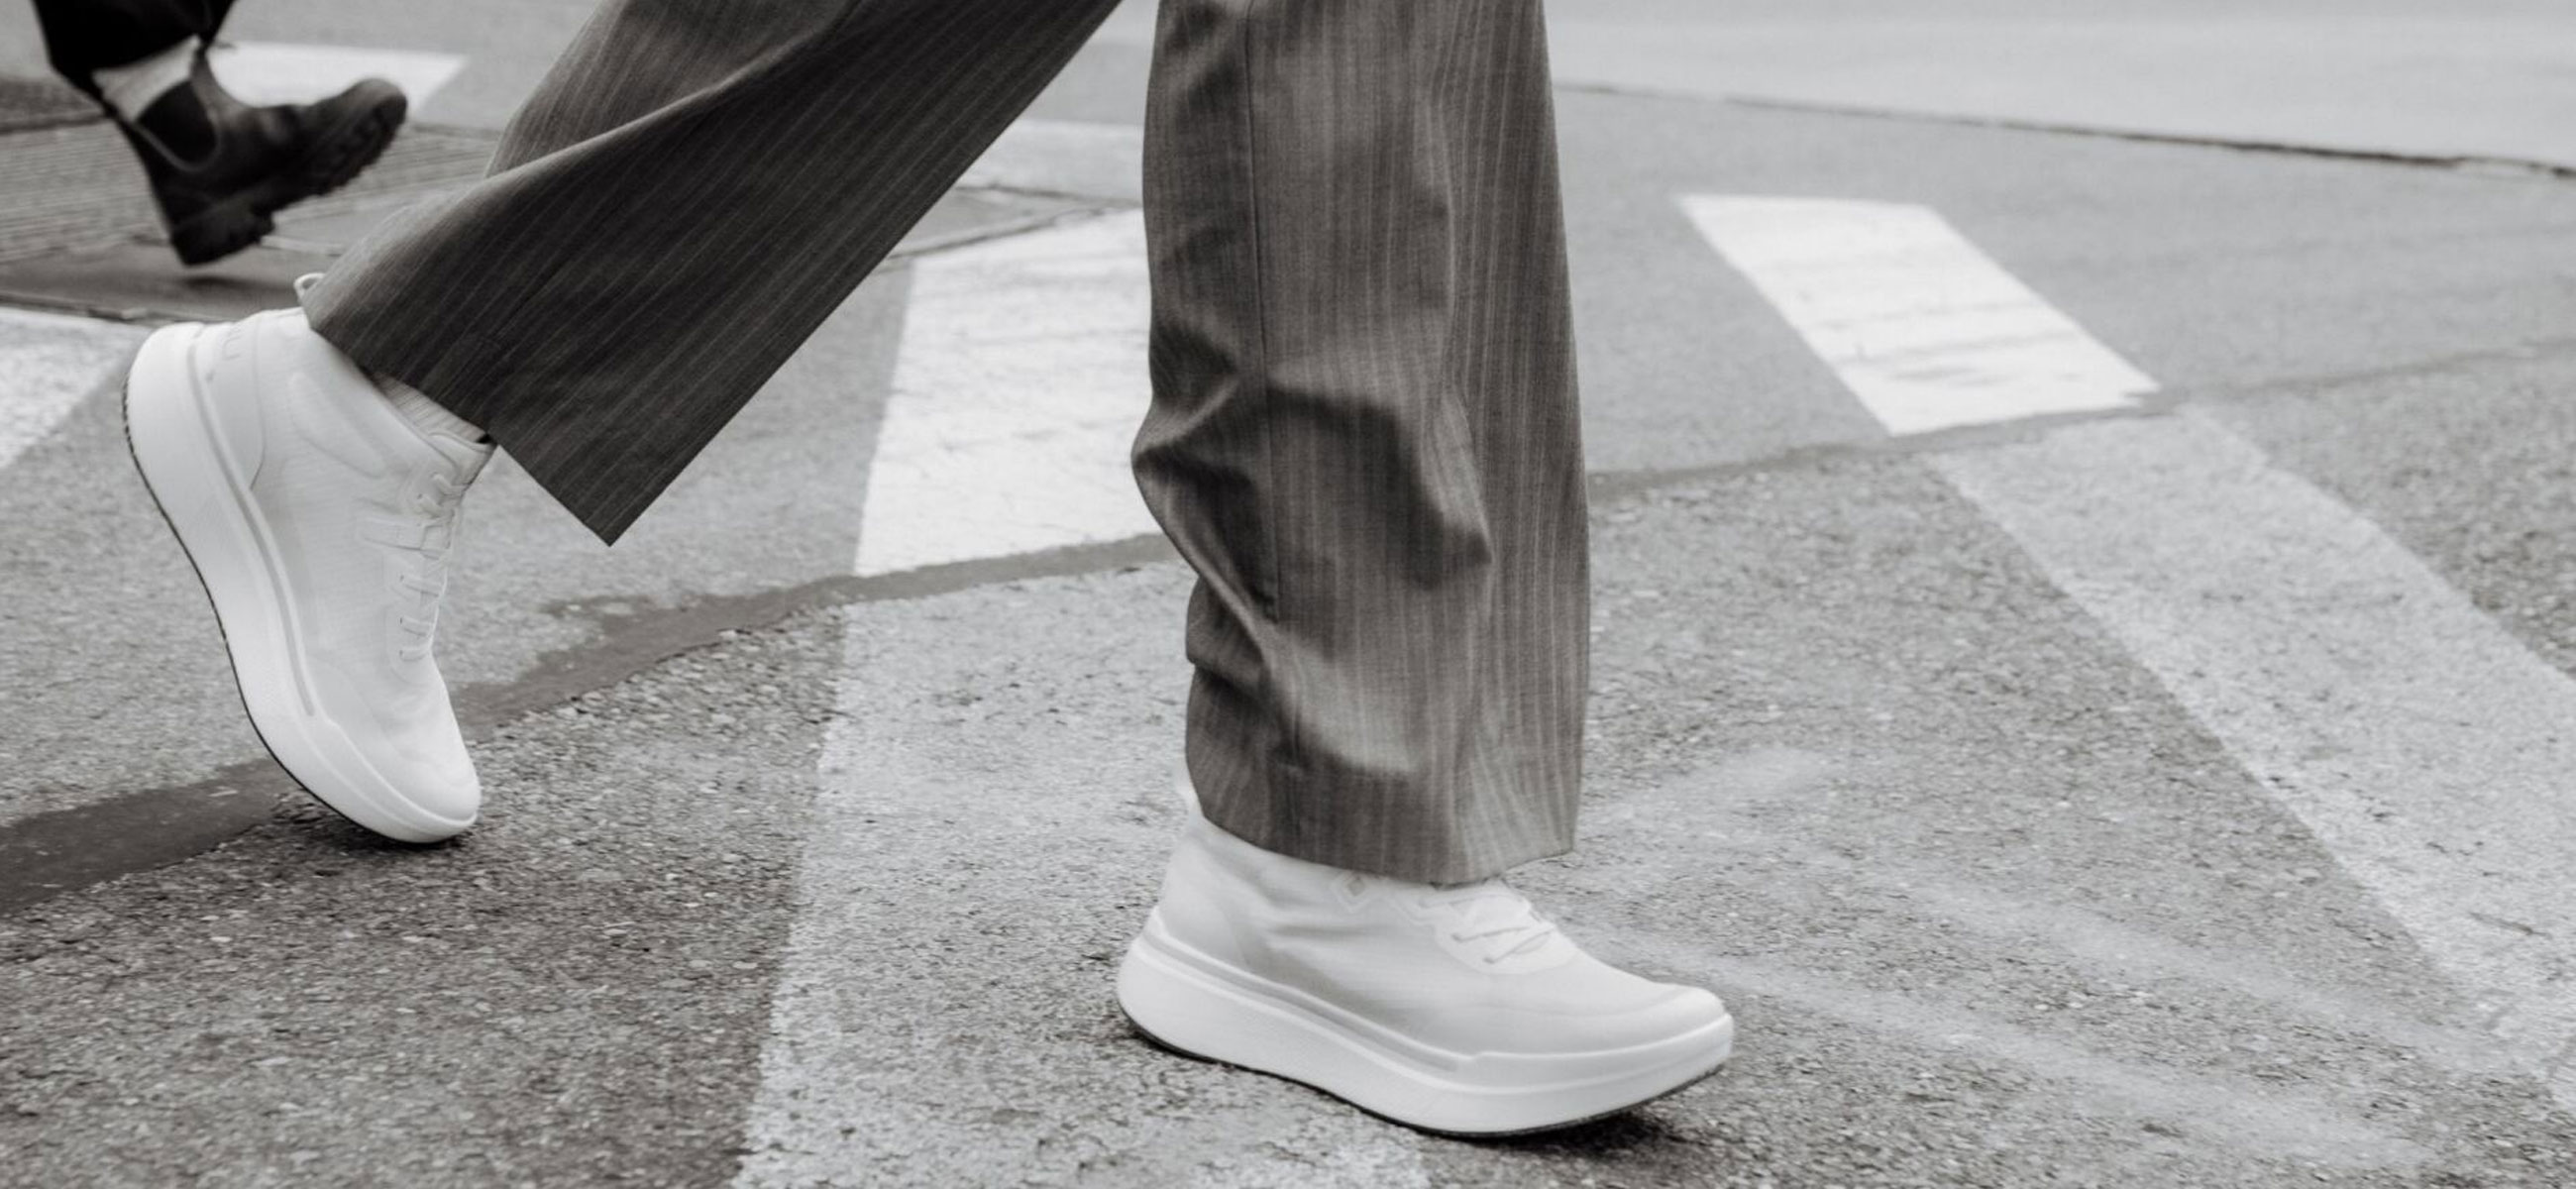 Close up of persons legs walking across a street wearing Ahnu shoes.